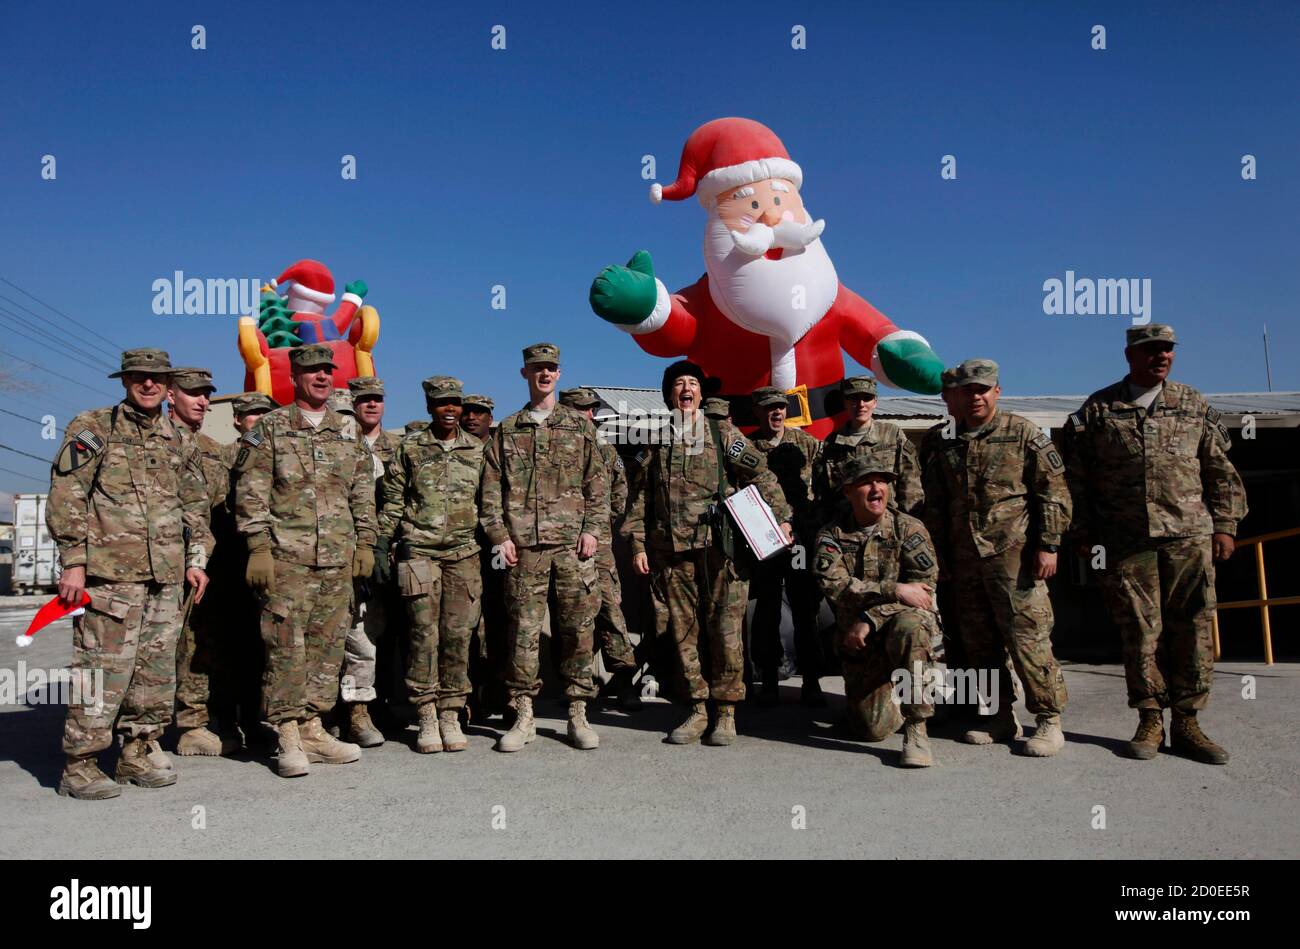 NATO troops from the International Security Assistance Force (ISAF) pose for pictures during Christmas celebrations at Bagram Airfield, north of Kabul, December 25, 2013. REUTERS/Mohammad Ismail (AFGHANISTAN - Tags: MILITARY SOCIETY) Stock Photo